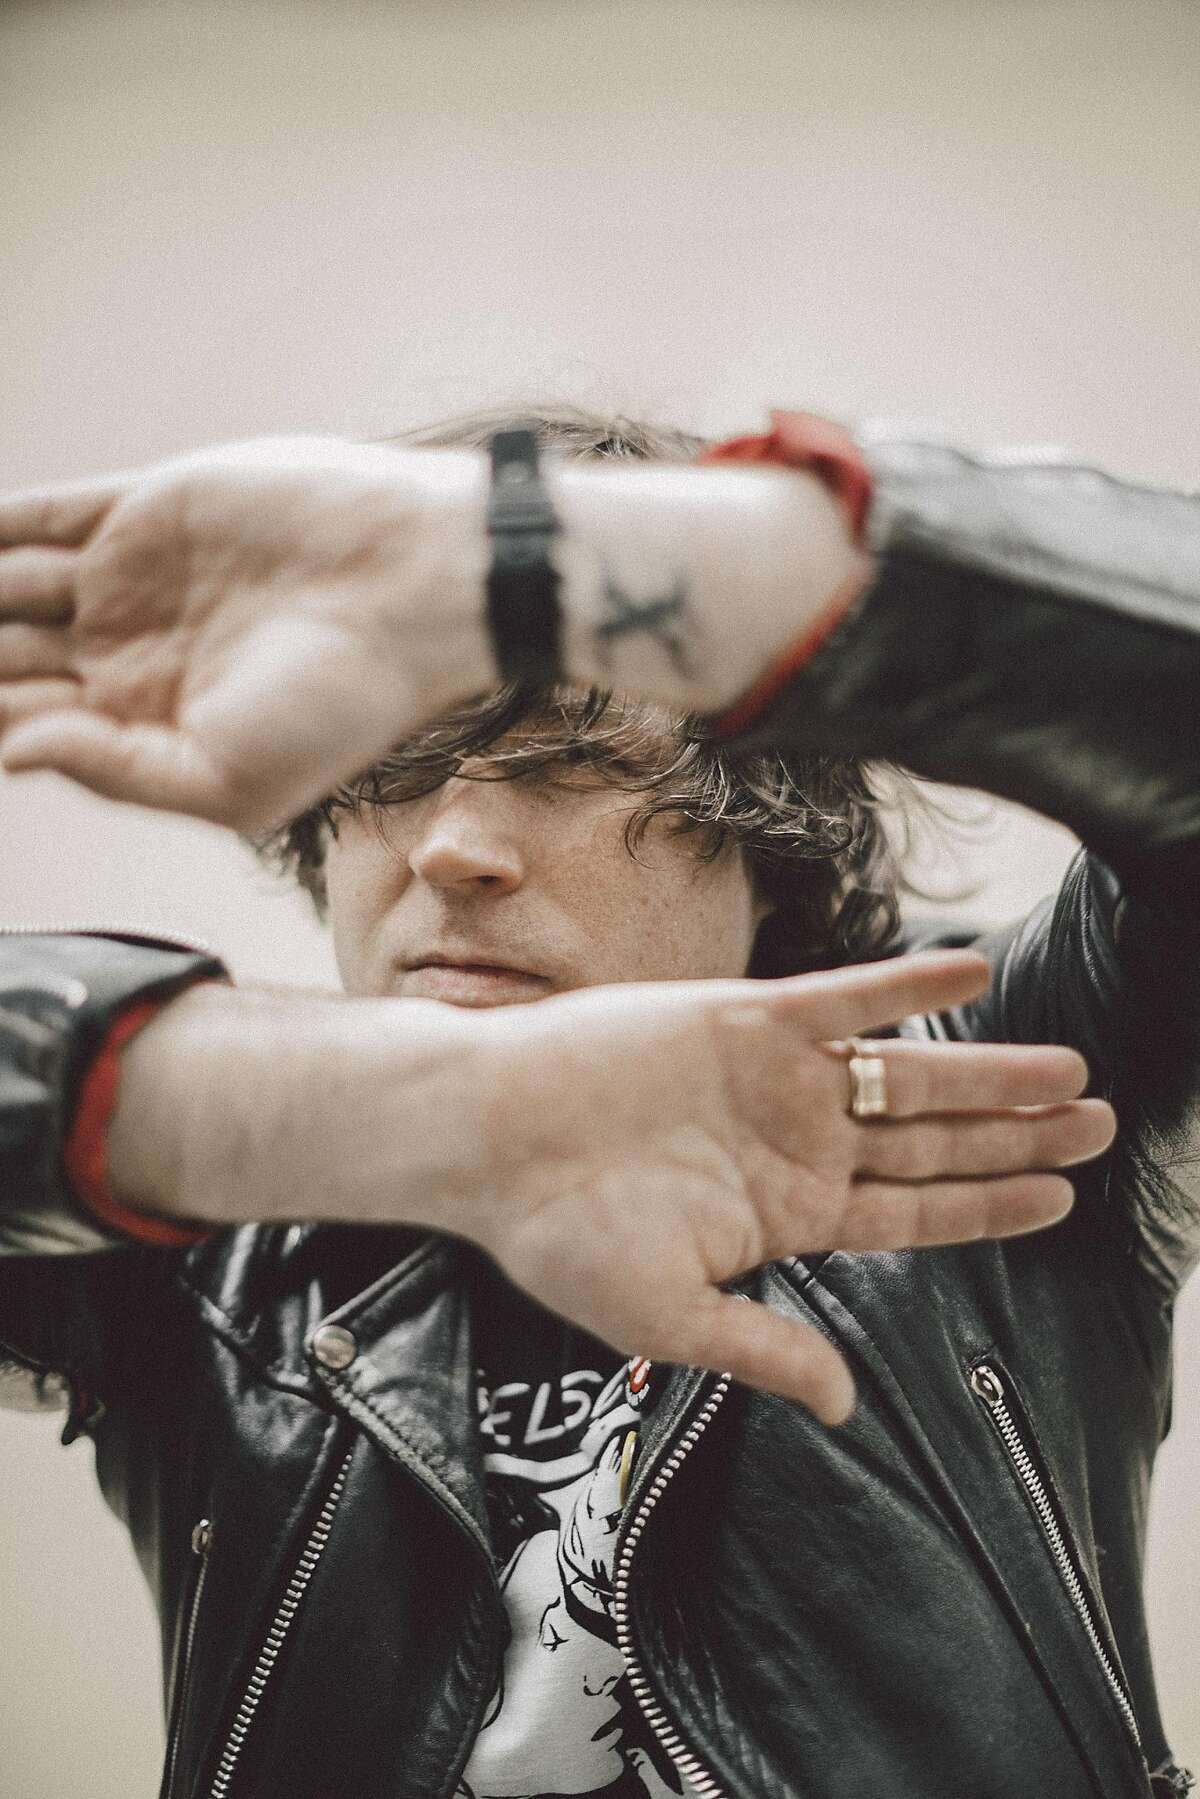 Musician Ryan Adams, whose new album "Prisoner" is due out soon, in Los Angeles, Feb. 6, 2017. Adams recalls the night at the Ryman Auditorium in Nashville when a young man near the front was persistently loud and unruly, and at one point shouted a request for "Summer of '69," a Bryan Adams song. (Elizabeth Weinberg/The New York Times)